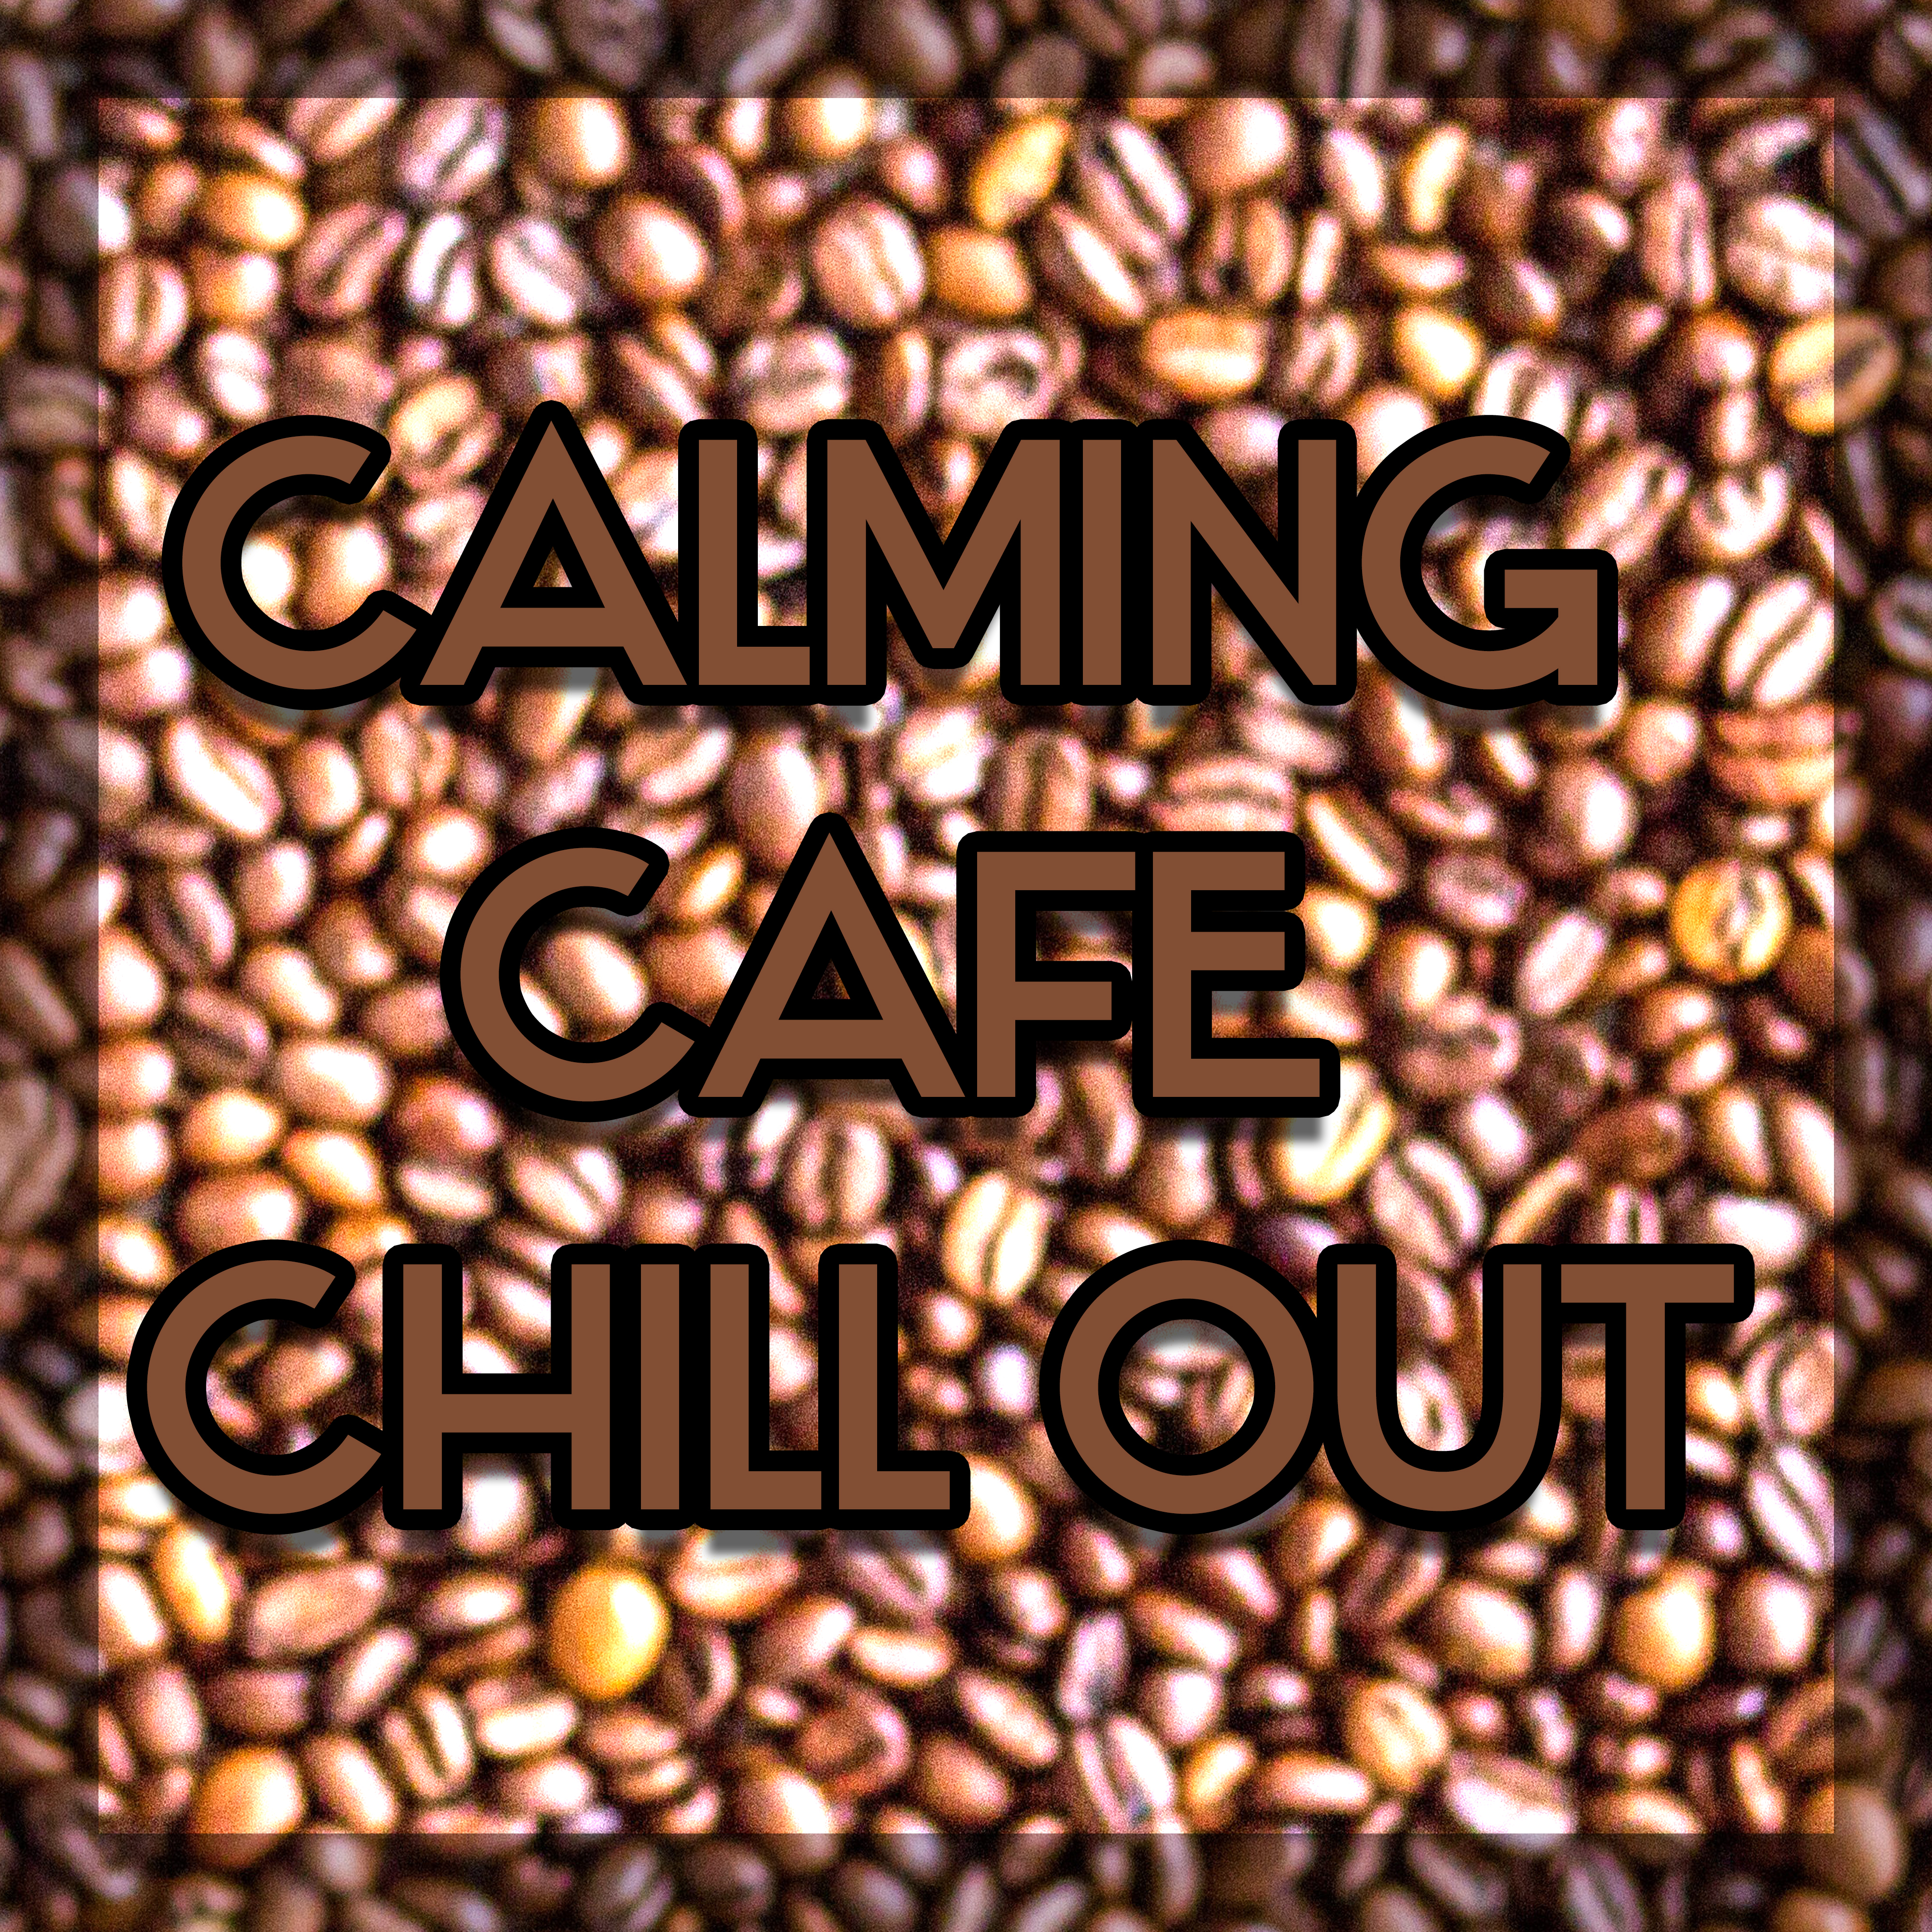 Calming Cafe Chill Out – Cafe Lounge, Chill Out Vibes, Summer Relaxation, Tropical Island